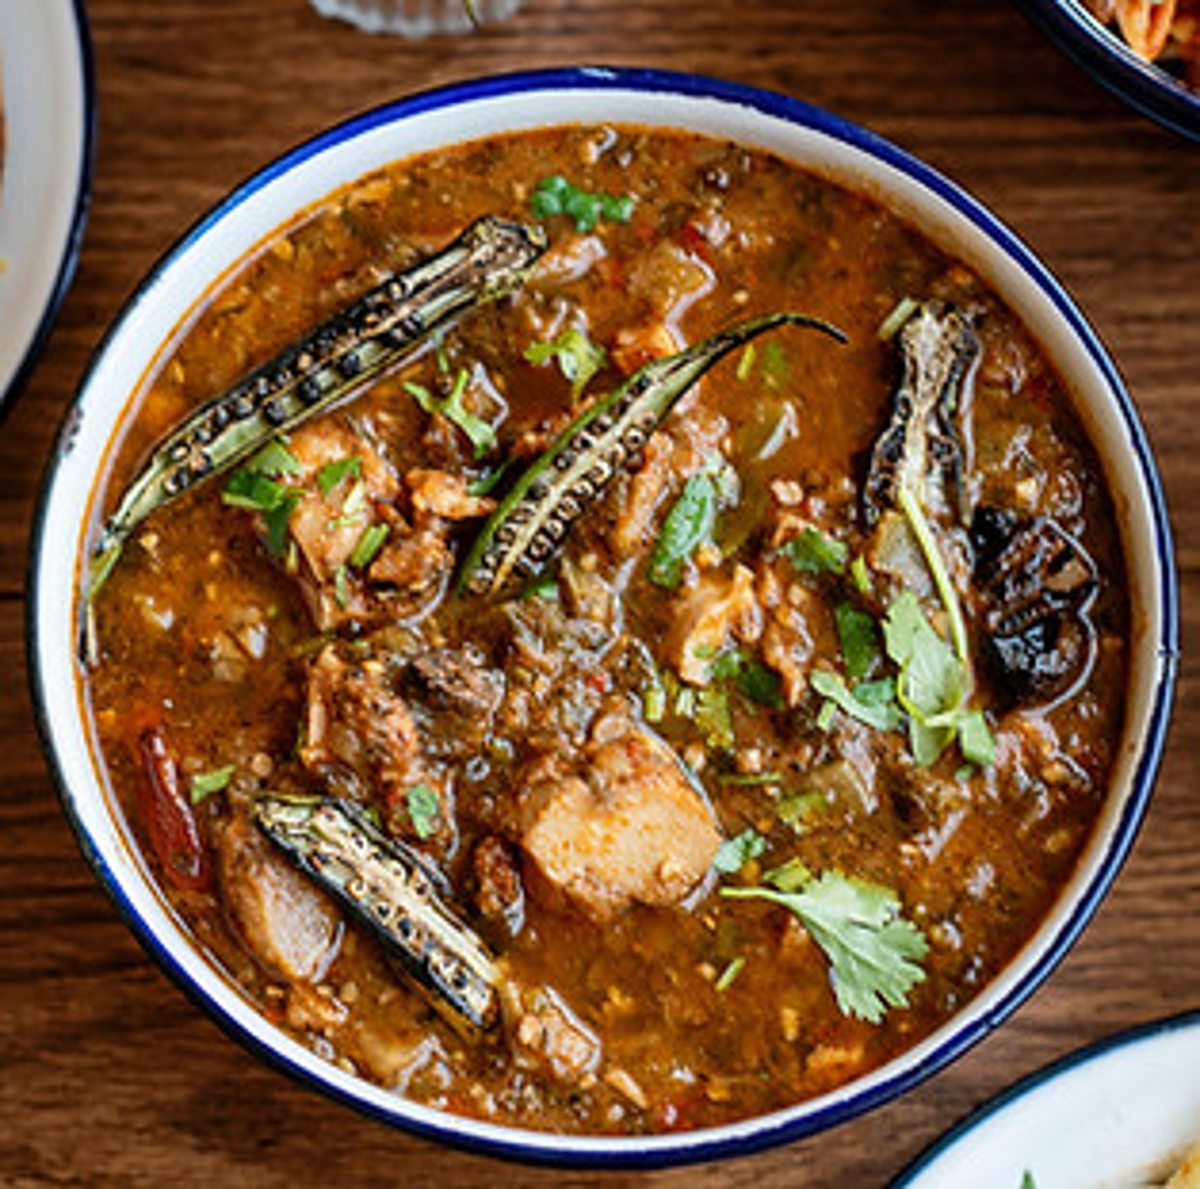 Gumbo Social Ready to Open First Brick and Mortar Restaurant in the Bayview, San Francisco